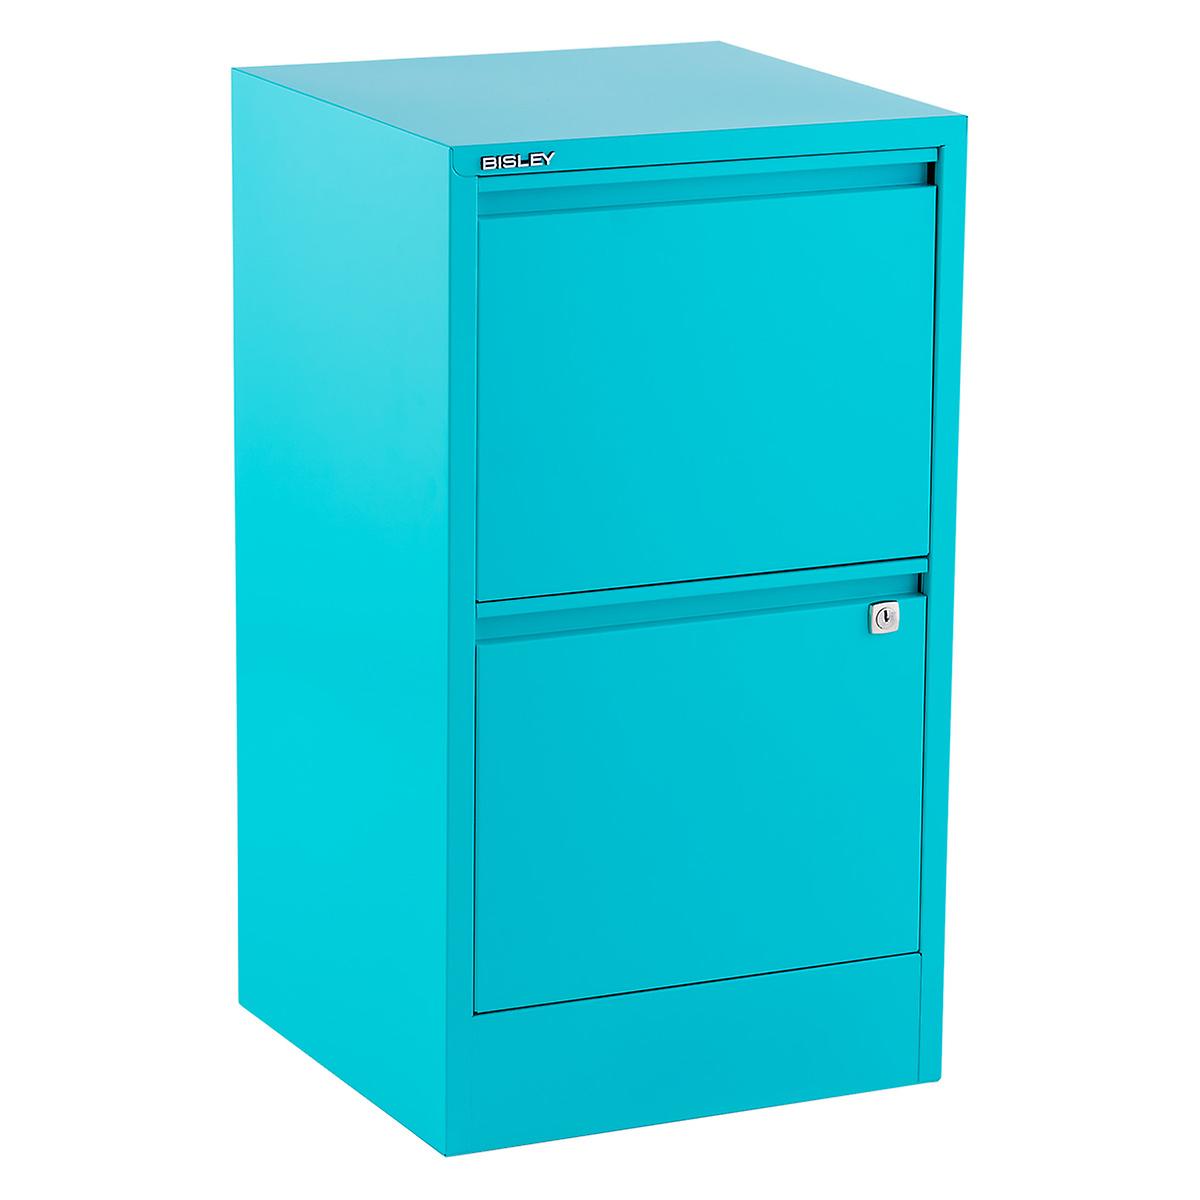 Bisley Aqua 2 3 Drawer Locking Filing Cabinets The Container